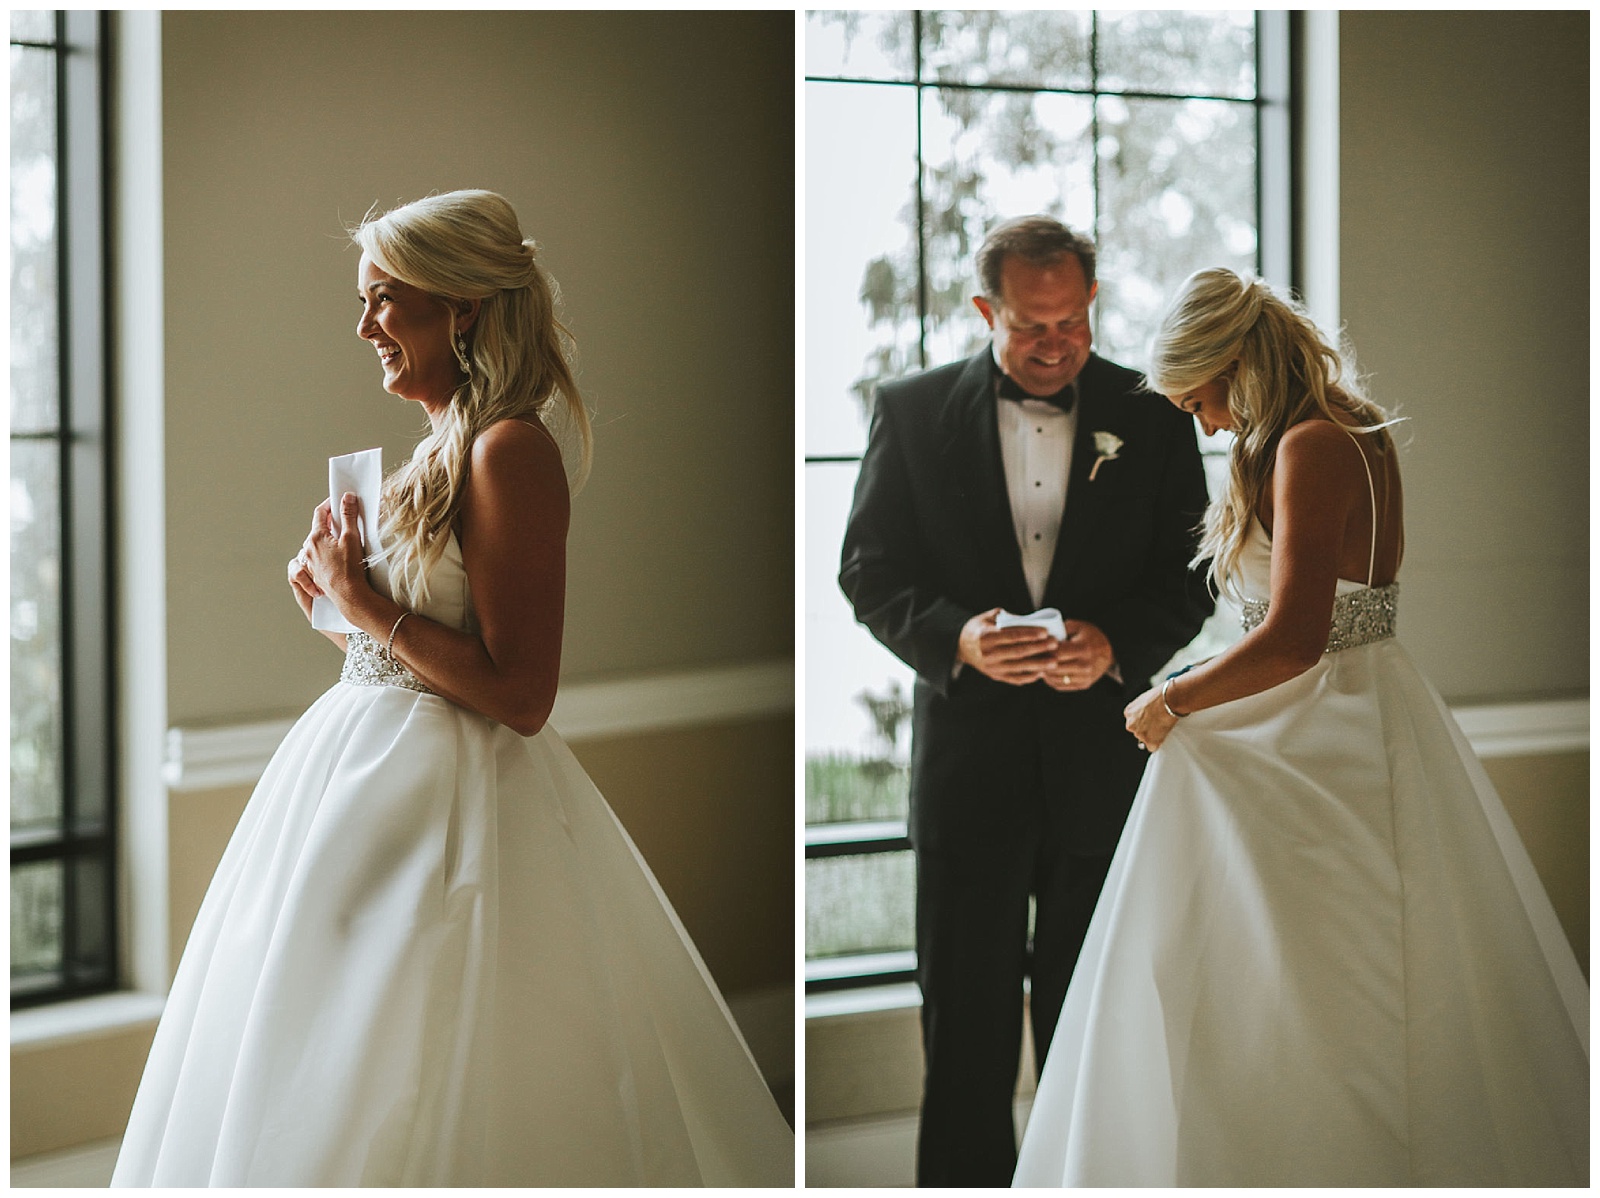 Meridian Mississippi Wedding at The Max